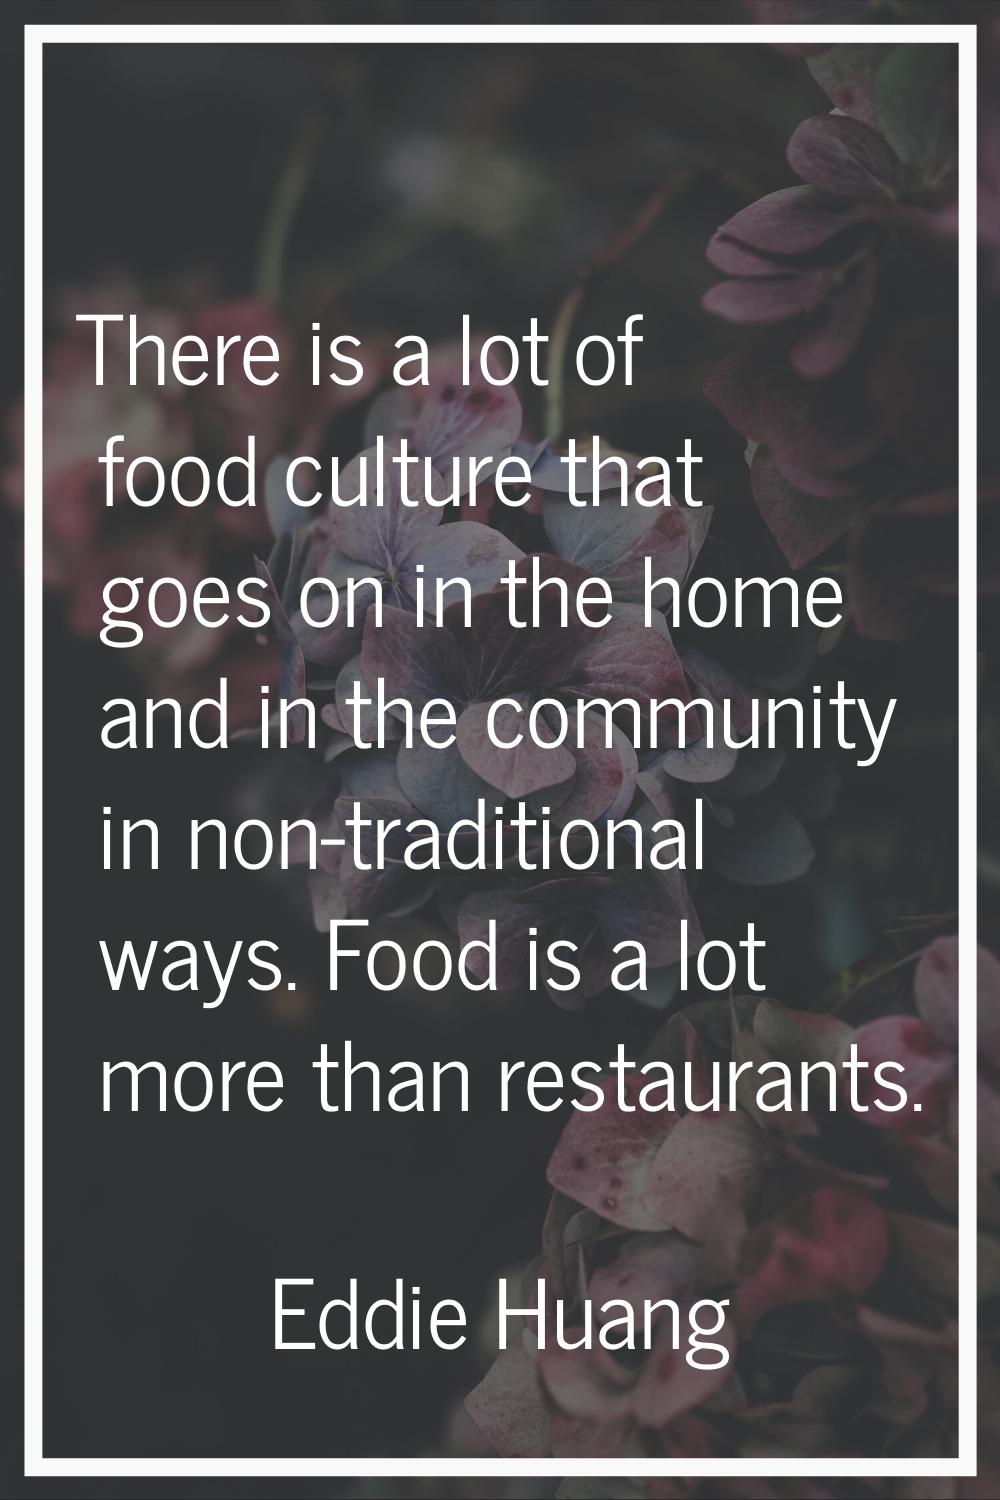 There is a lot of food culture that goes on in the home and in the community in non-traditional way